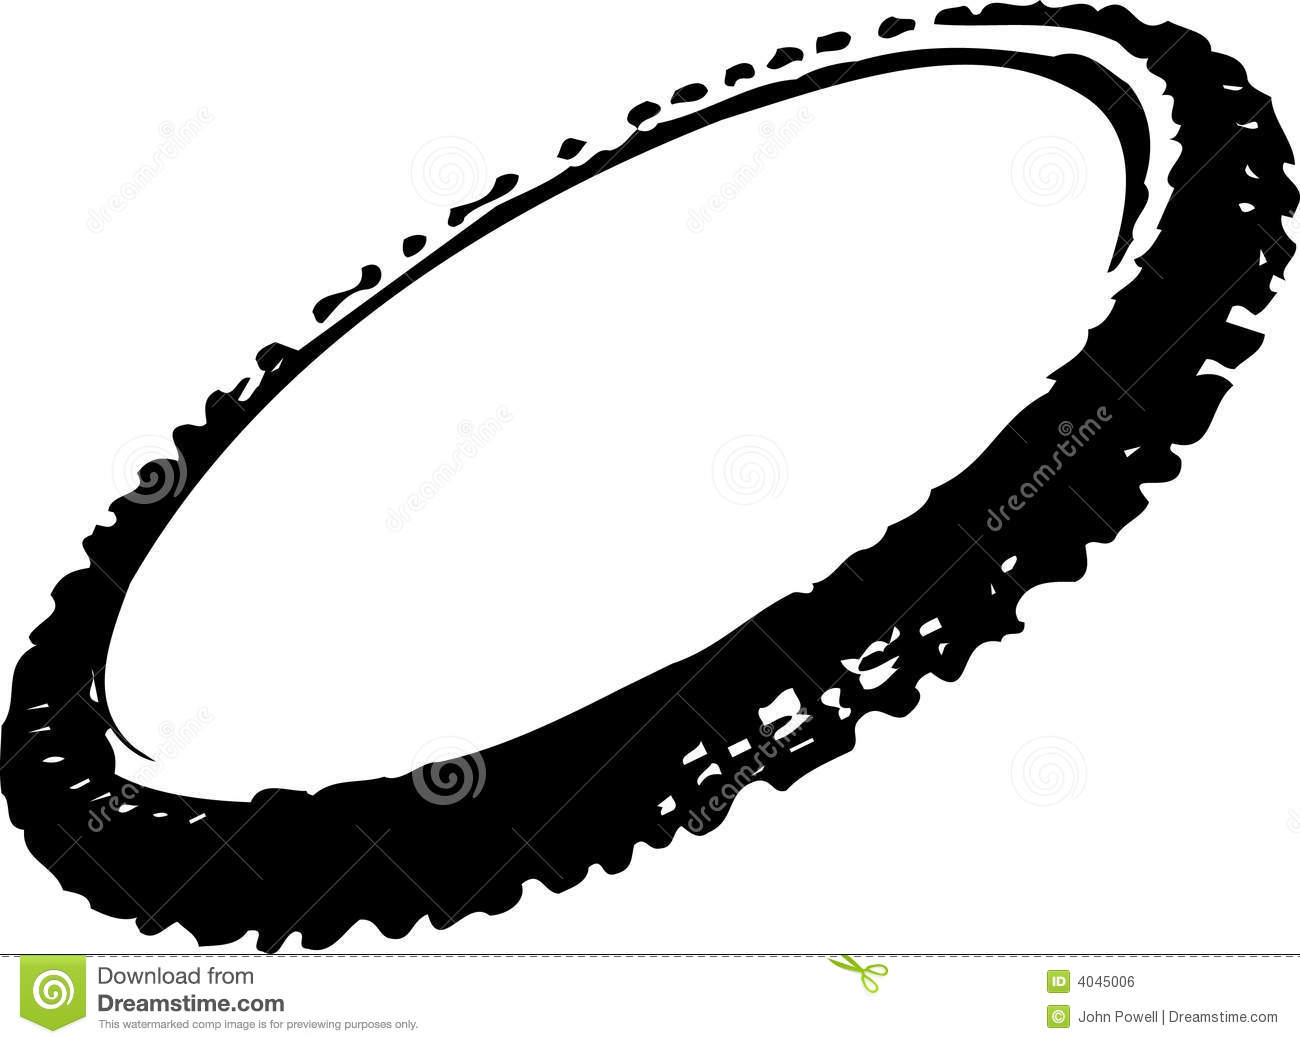 Bike Tire Silhouette Royalty Free Stock Image   Image  4045006